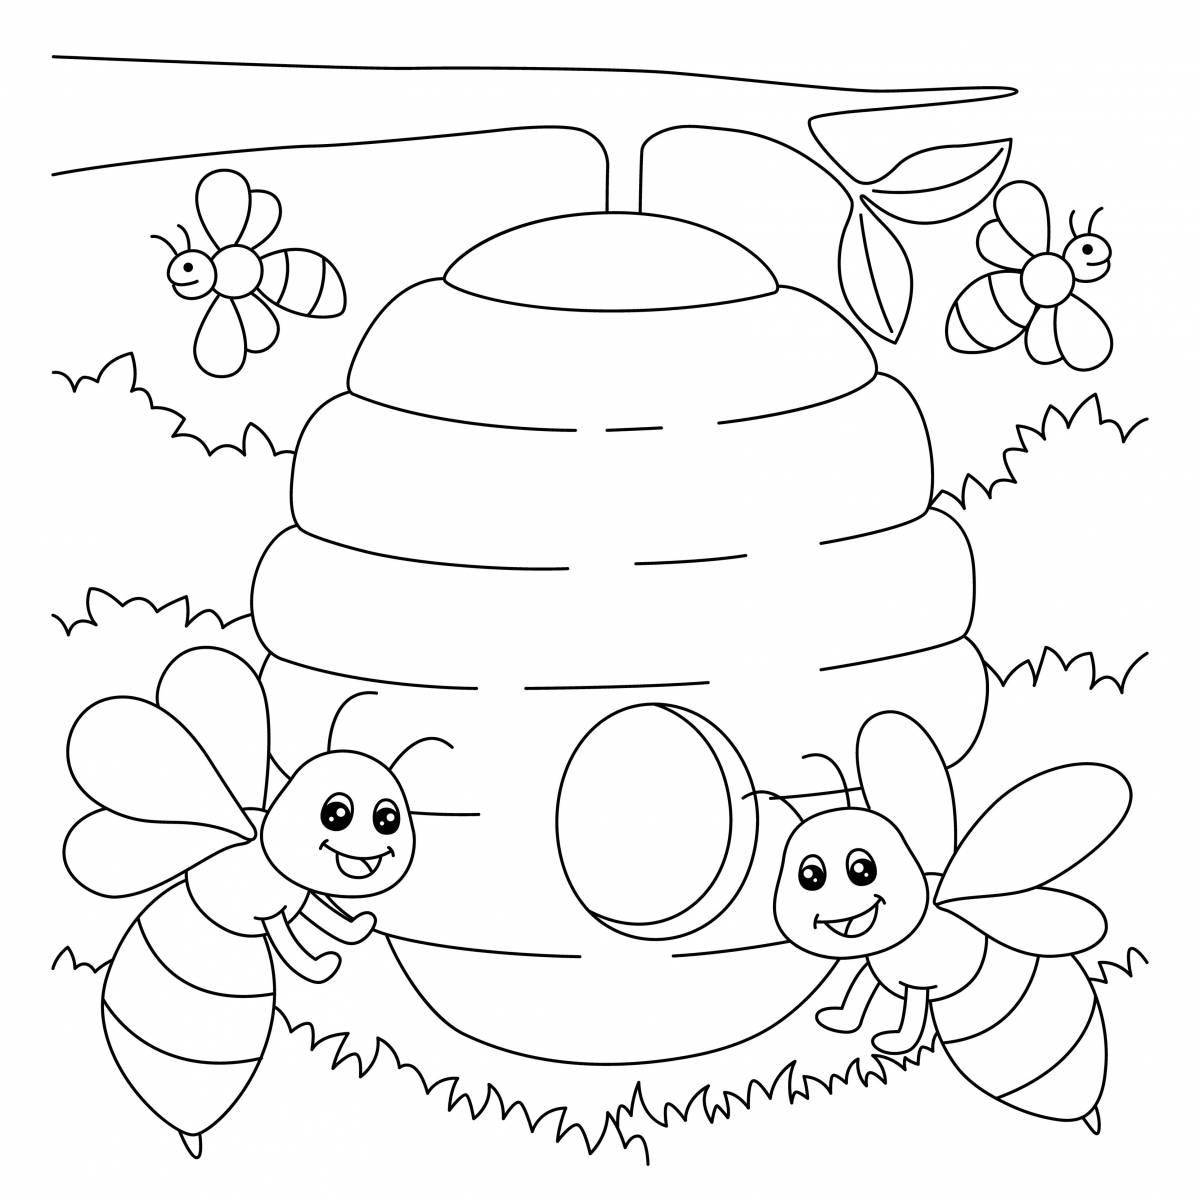 Adorable bee coloring book for 3-4 year olds